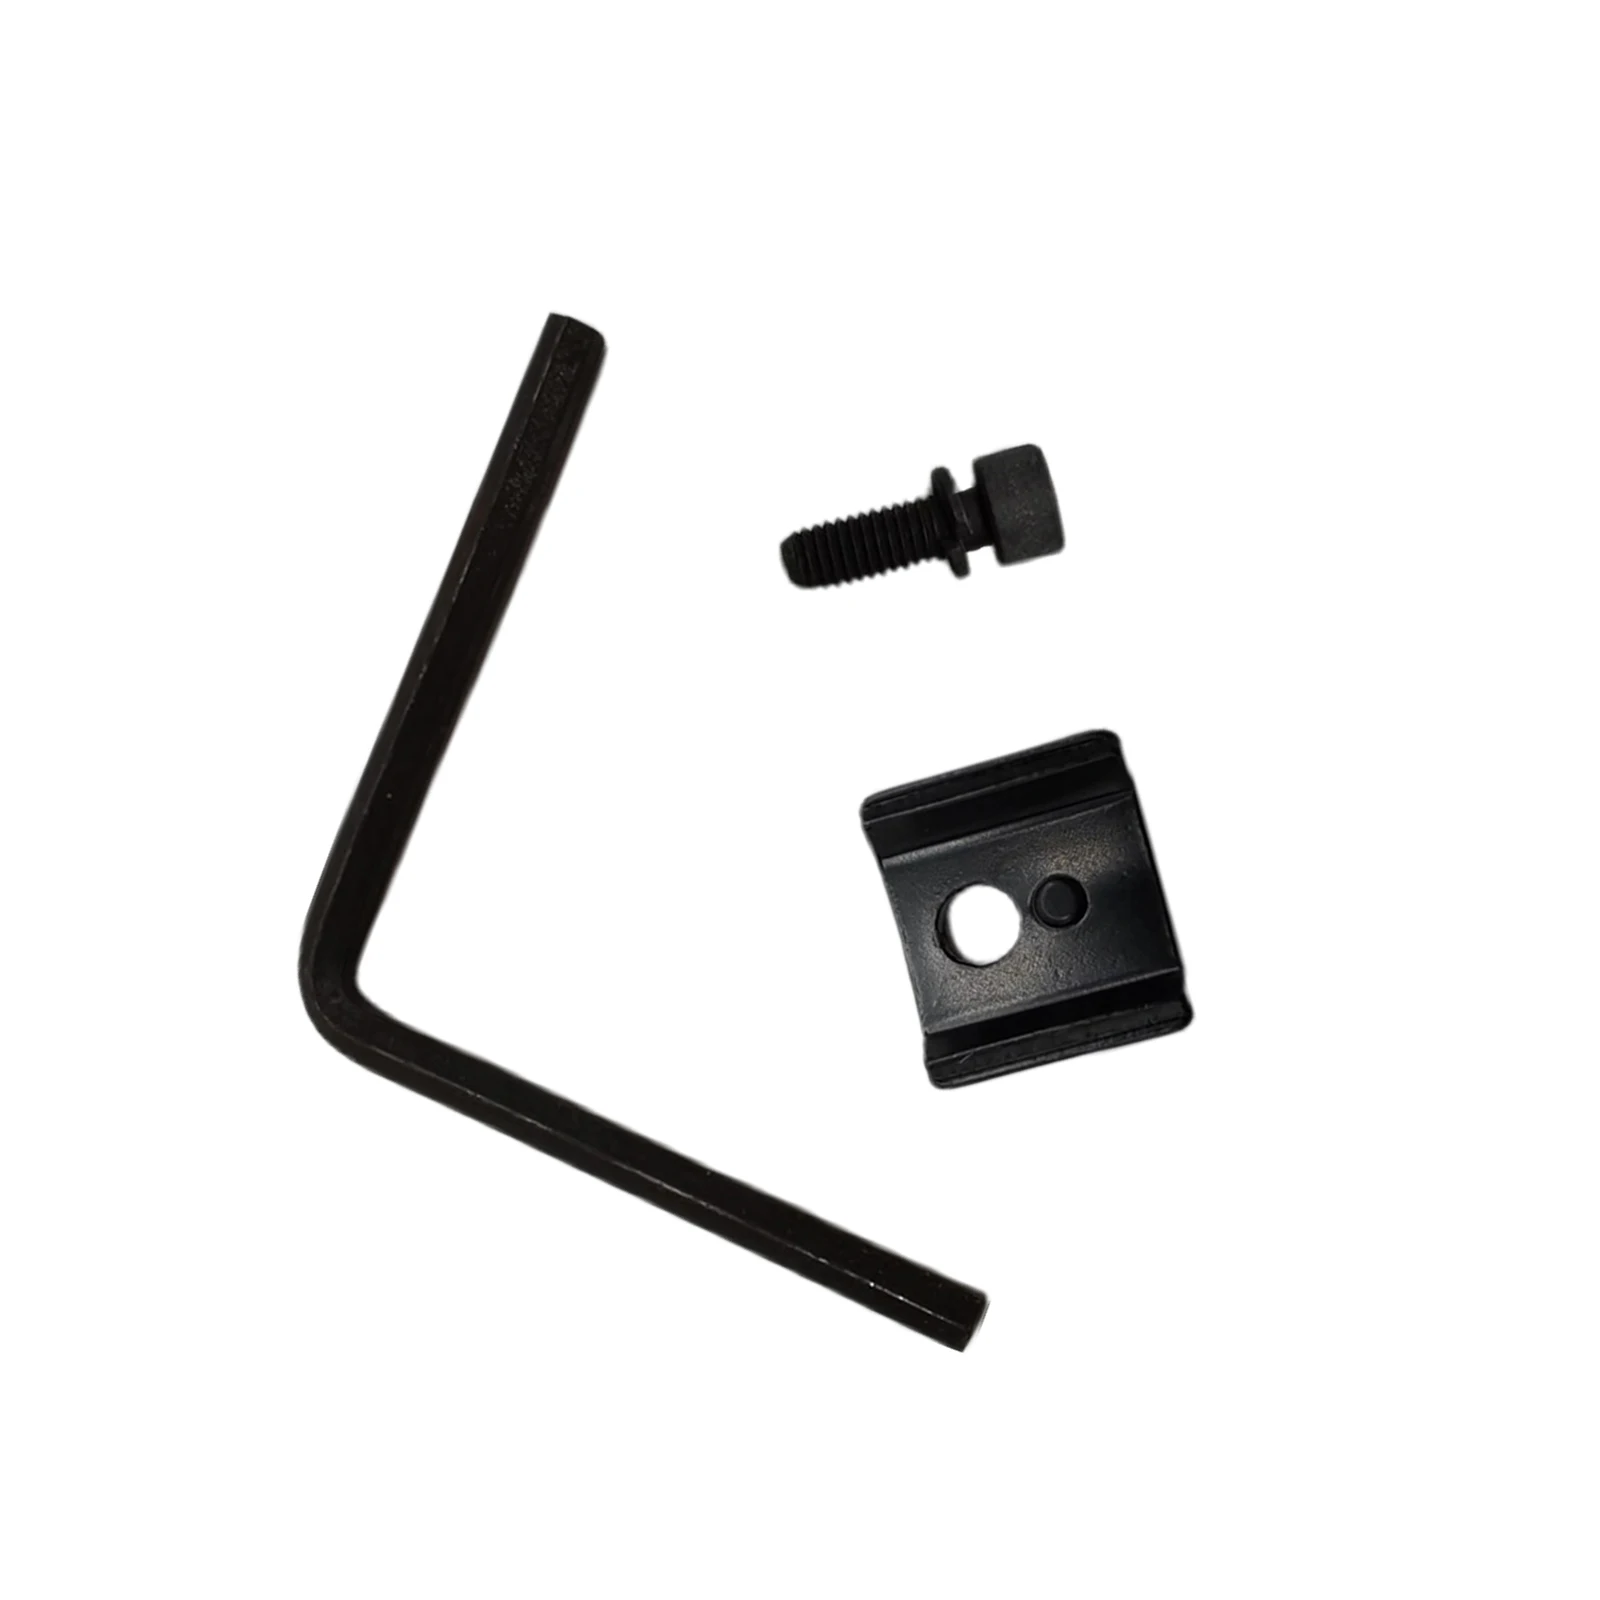 

Wrench Blade Clamp And Screw 49-22-5012 Screw And Clamp Kit Replacement Part Clamp And Screw Power Tools